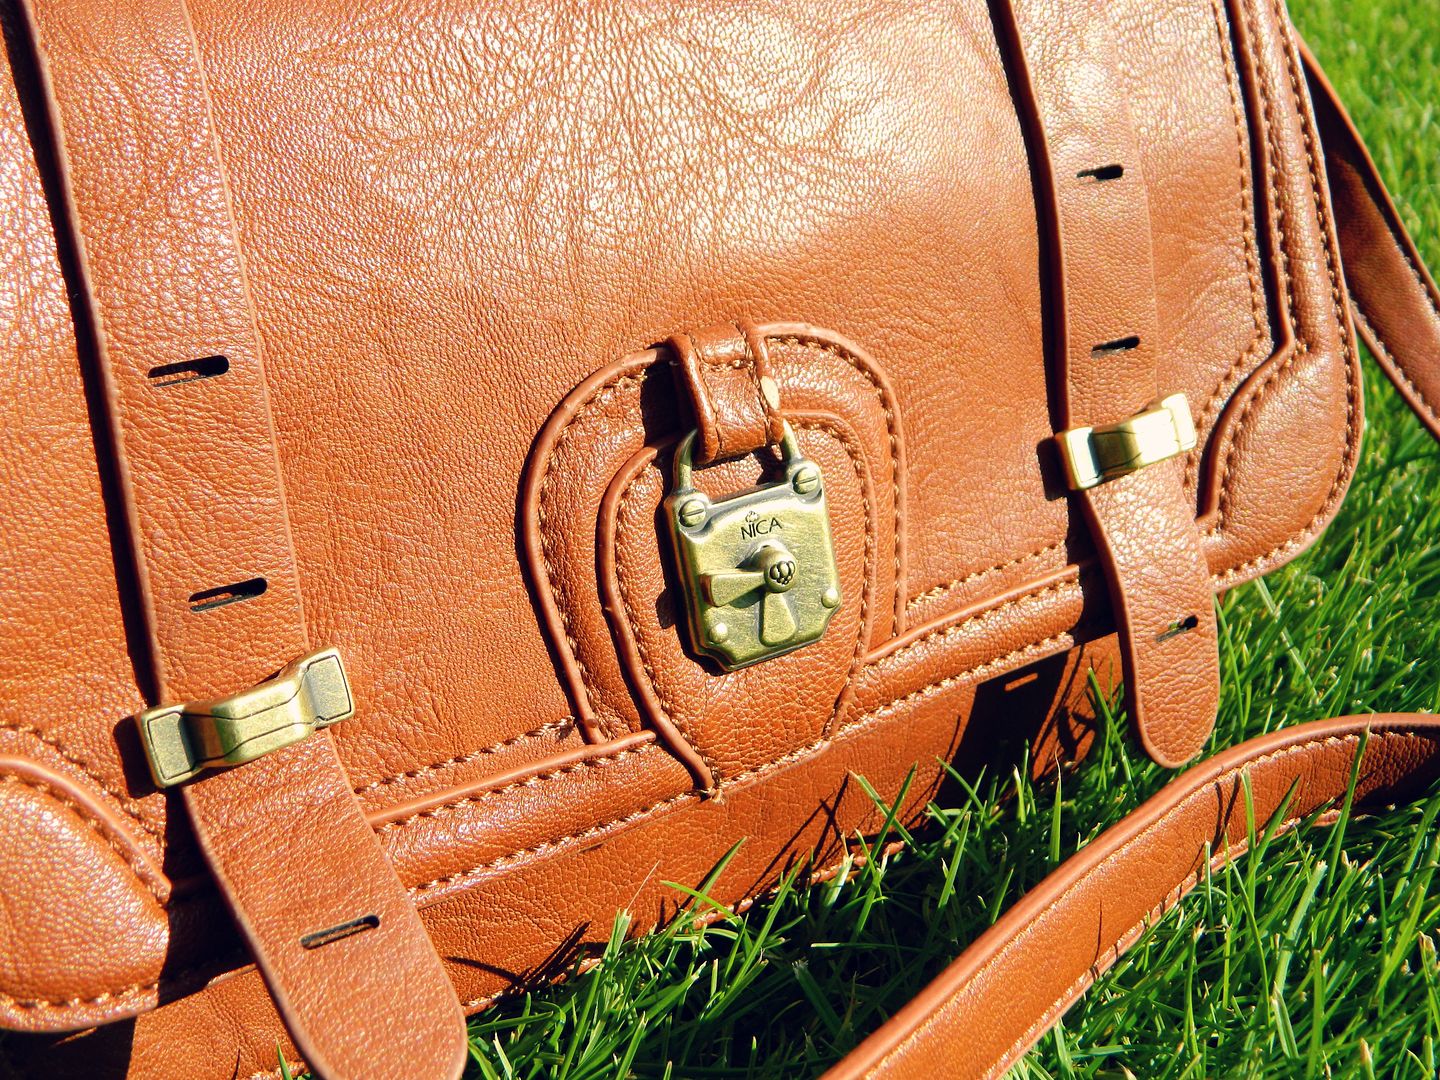 Bagable Bags Nica Bettina Small Satchel Lock Strap Detail Review Belle-amie UK Beauty Fashion Lifestyle Blog